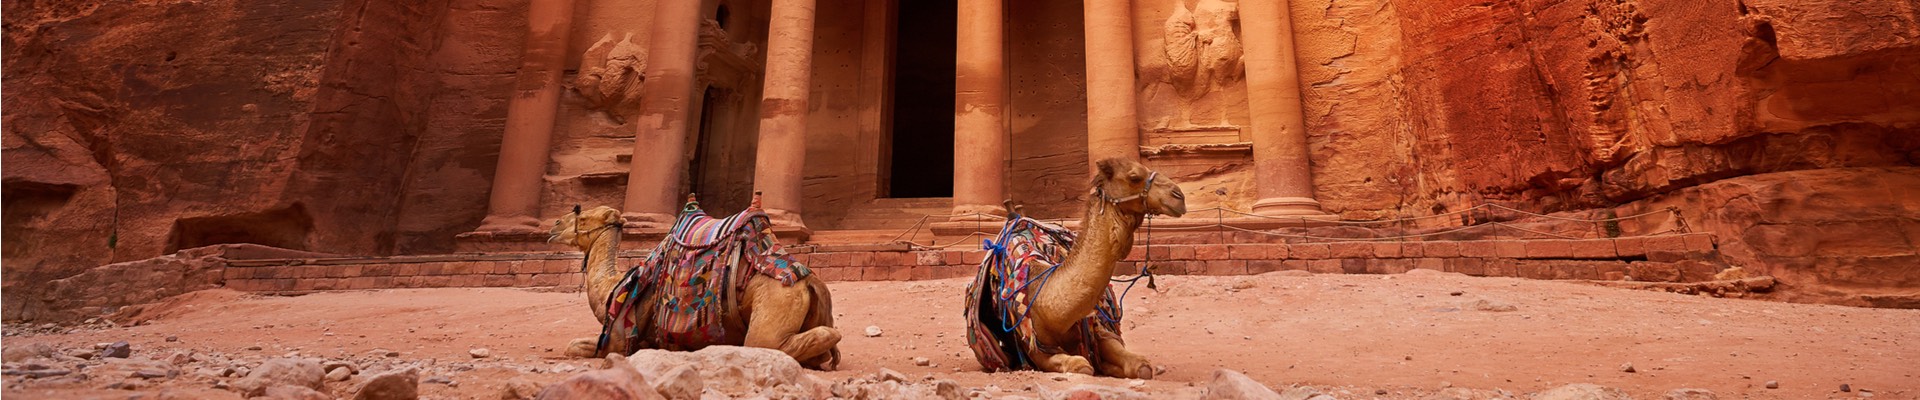 Journey to Israel and Petra 9 Day Tour